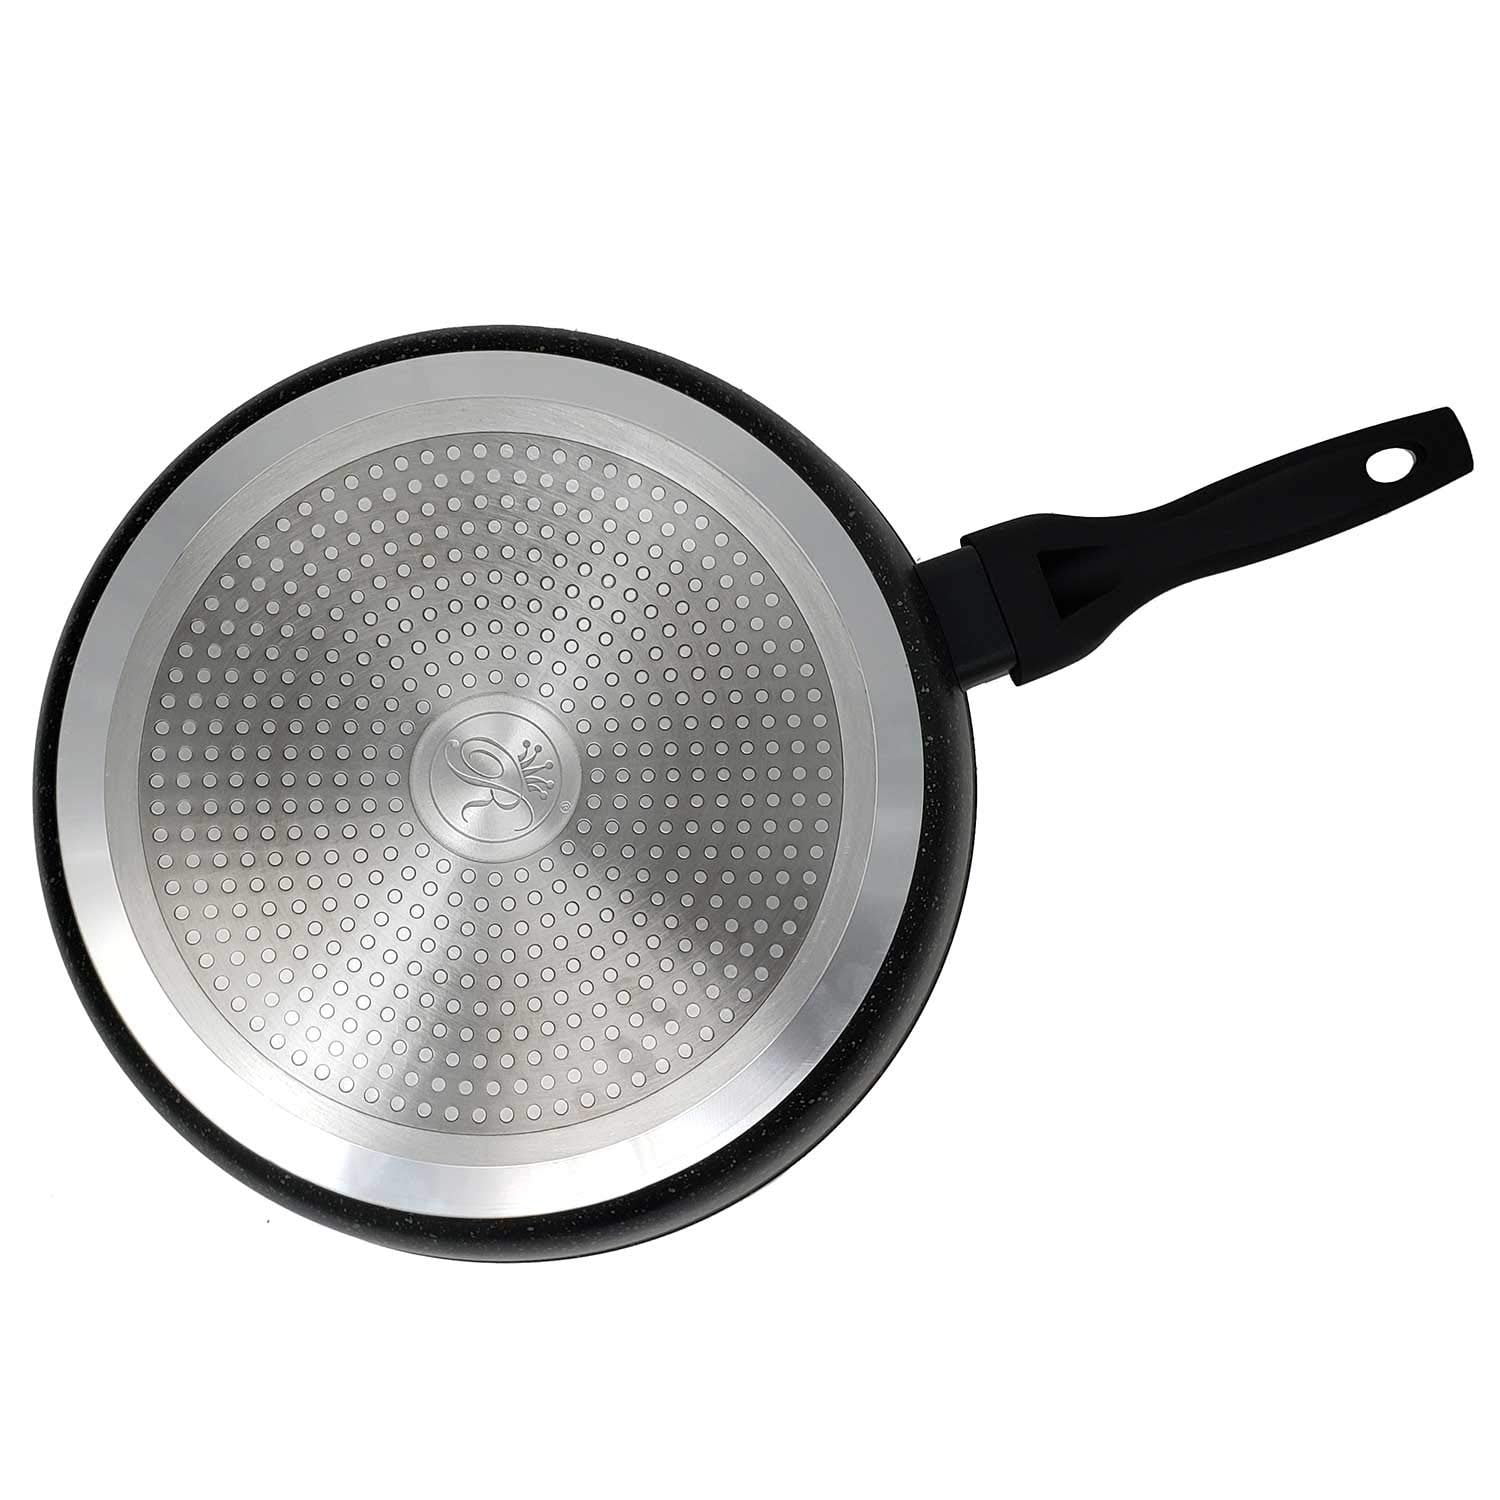 Cook N Home 10 .5-inch Aluminum Nonstick Marble coating Saute Skillet Pan  with Lid 02703 - The Home Depot